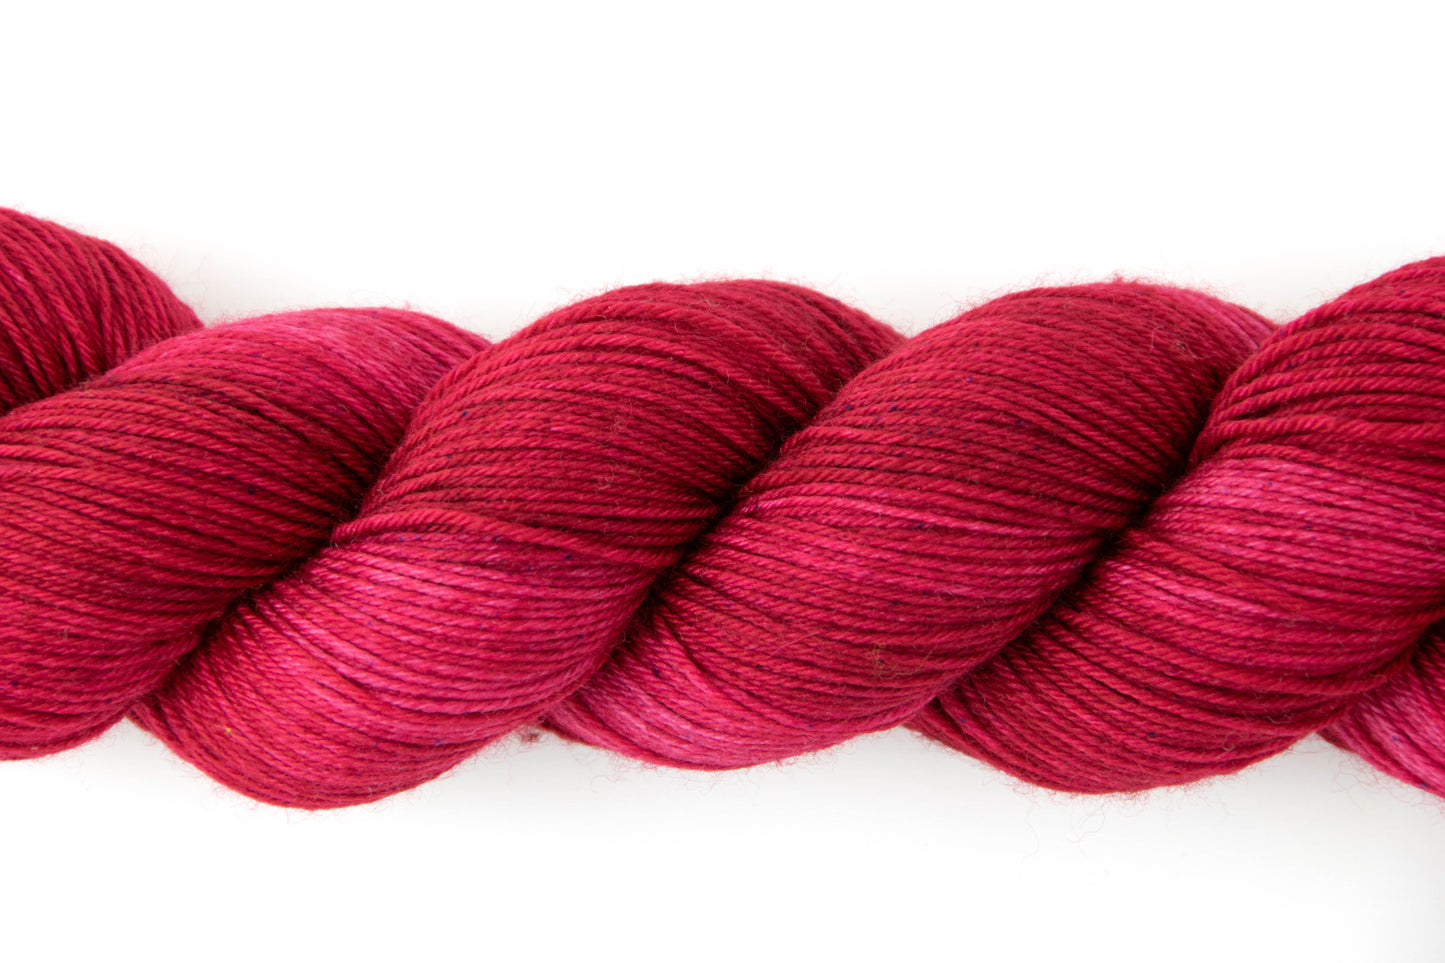 View of the tonal qualities of the yarn, which range from fire red to a dark fuchsia.